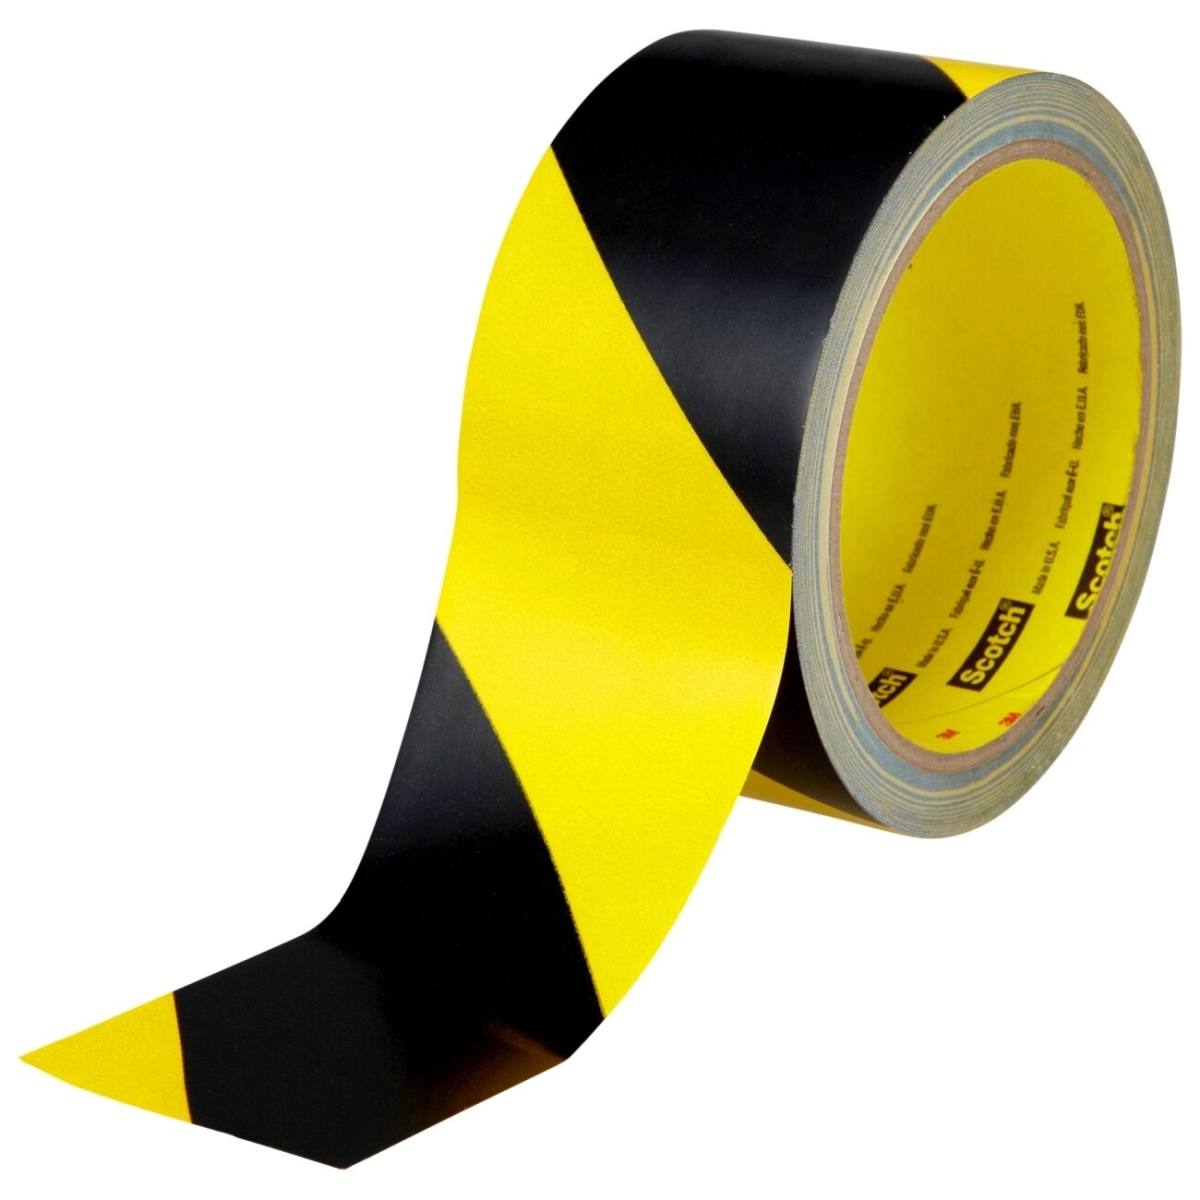 3M Hazard marking tape 5702, yellow/black, 50 mm x 33 m, individually and practically packed